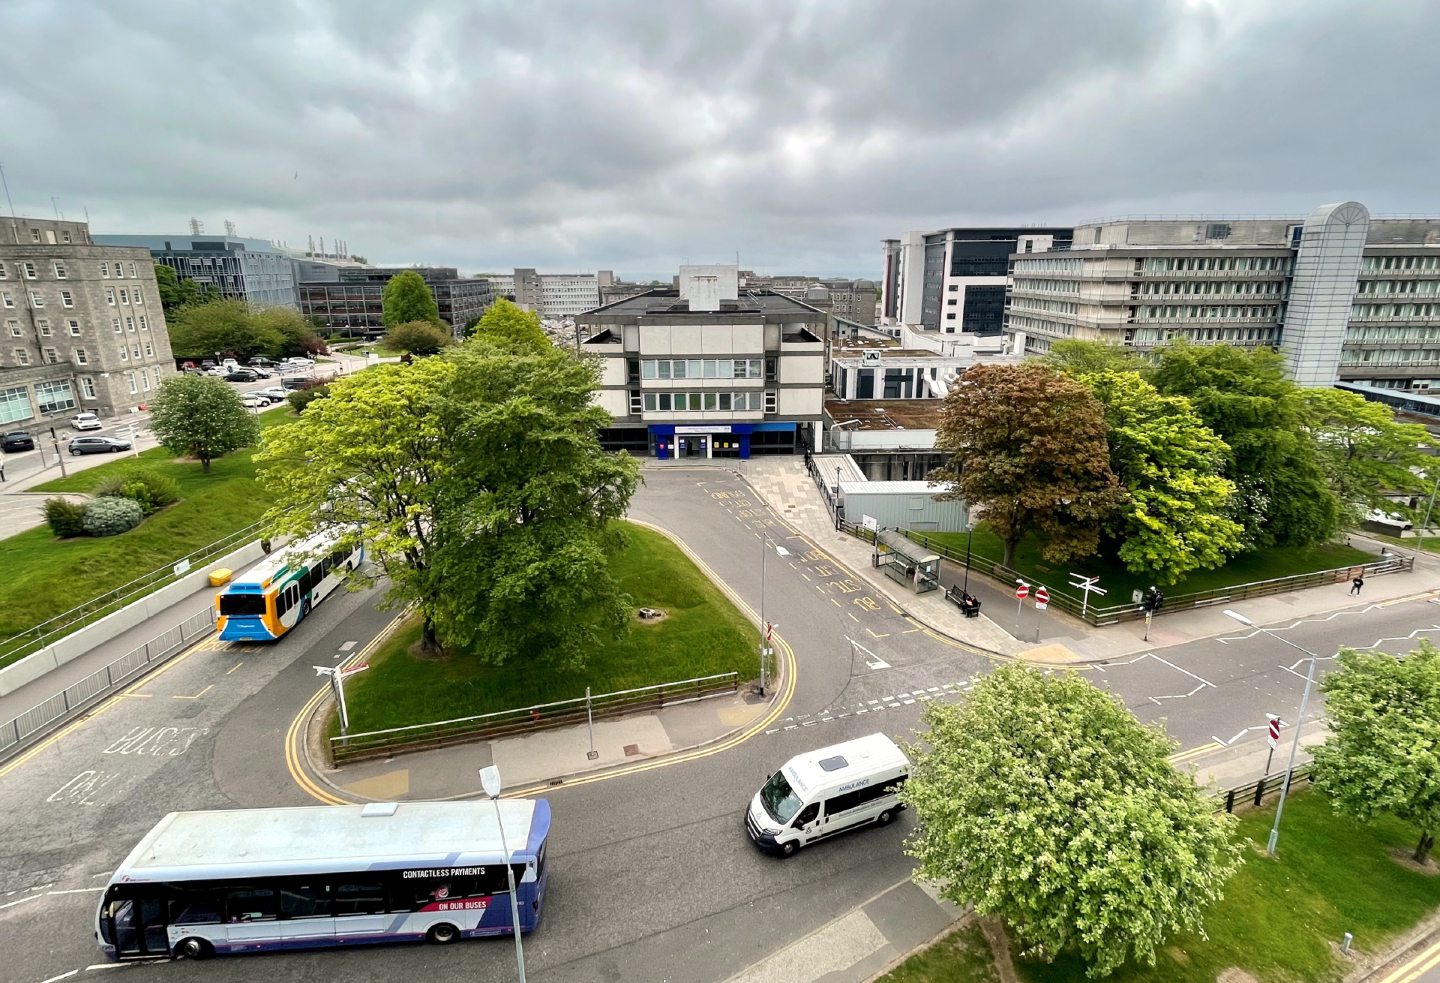 Aberdeen Royal Infirmary is one of many NHS Grampian hospitals affected. Image: Kami Thomson / DC Thomson